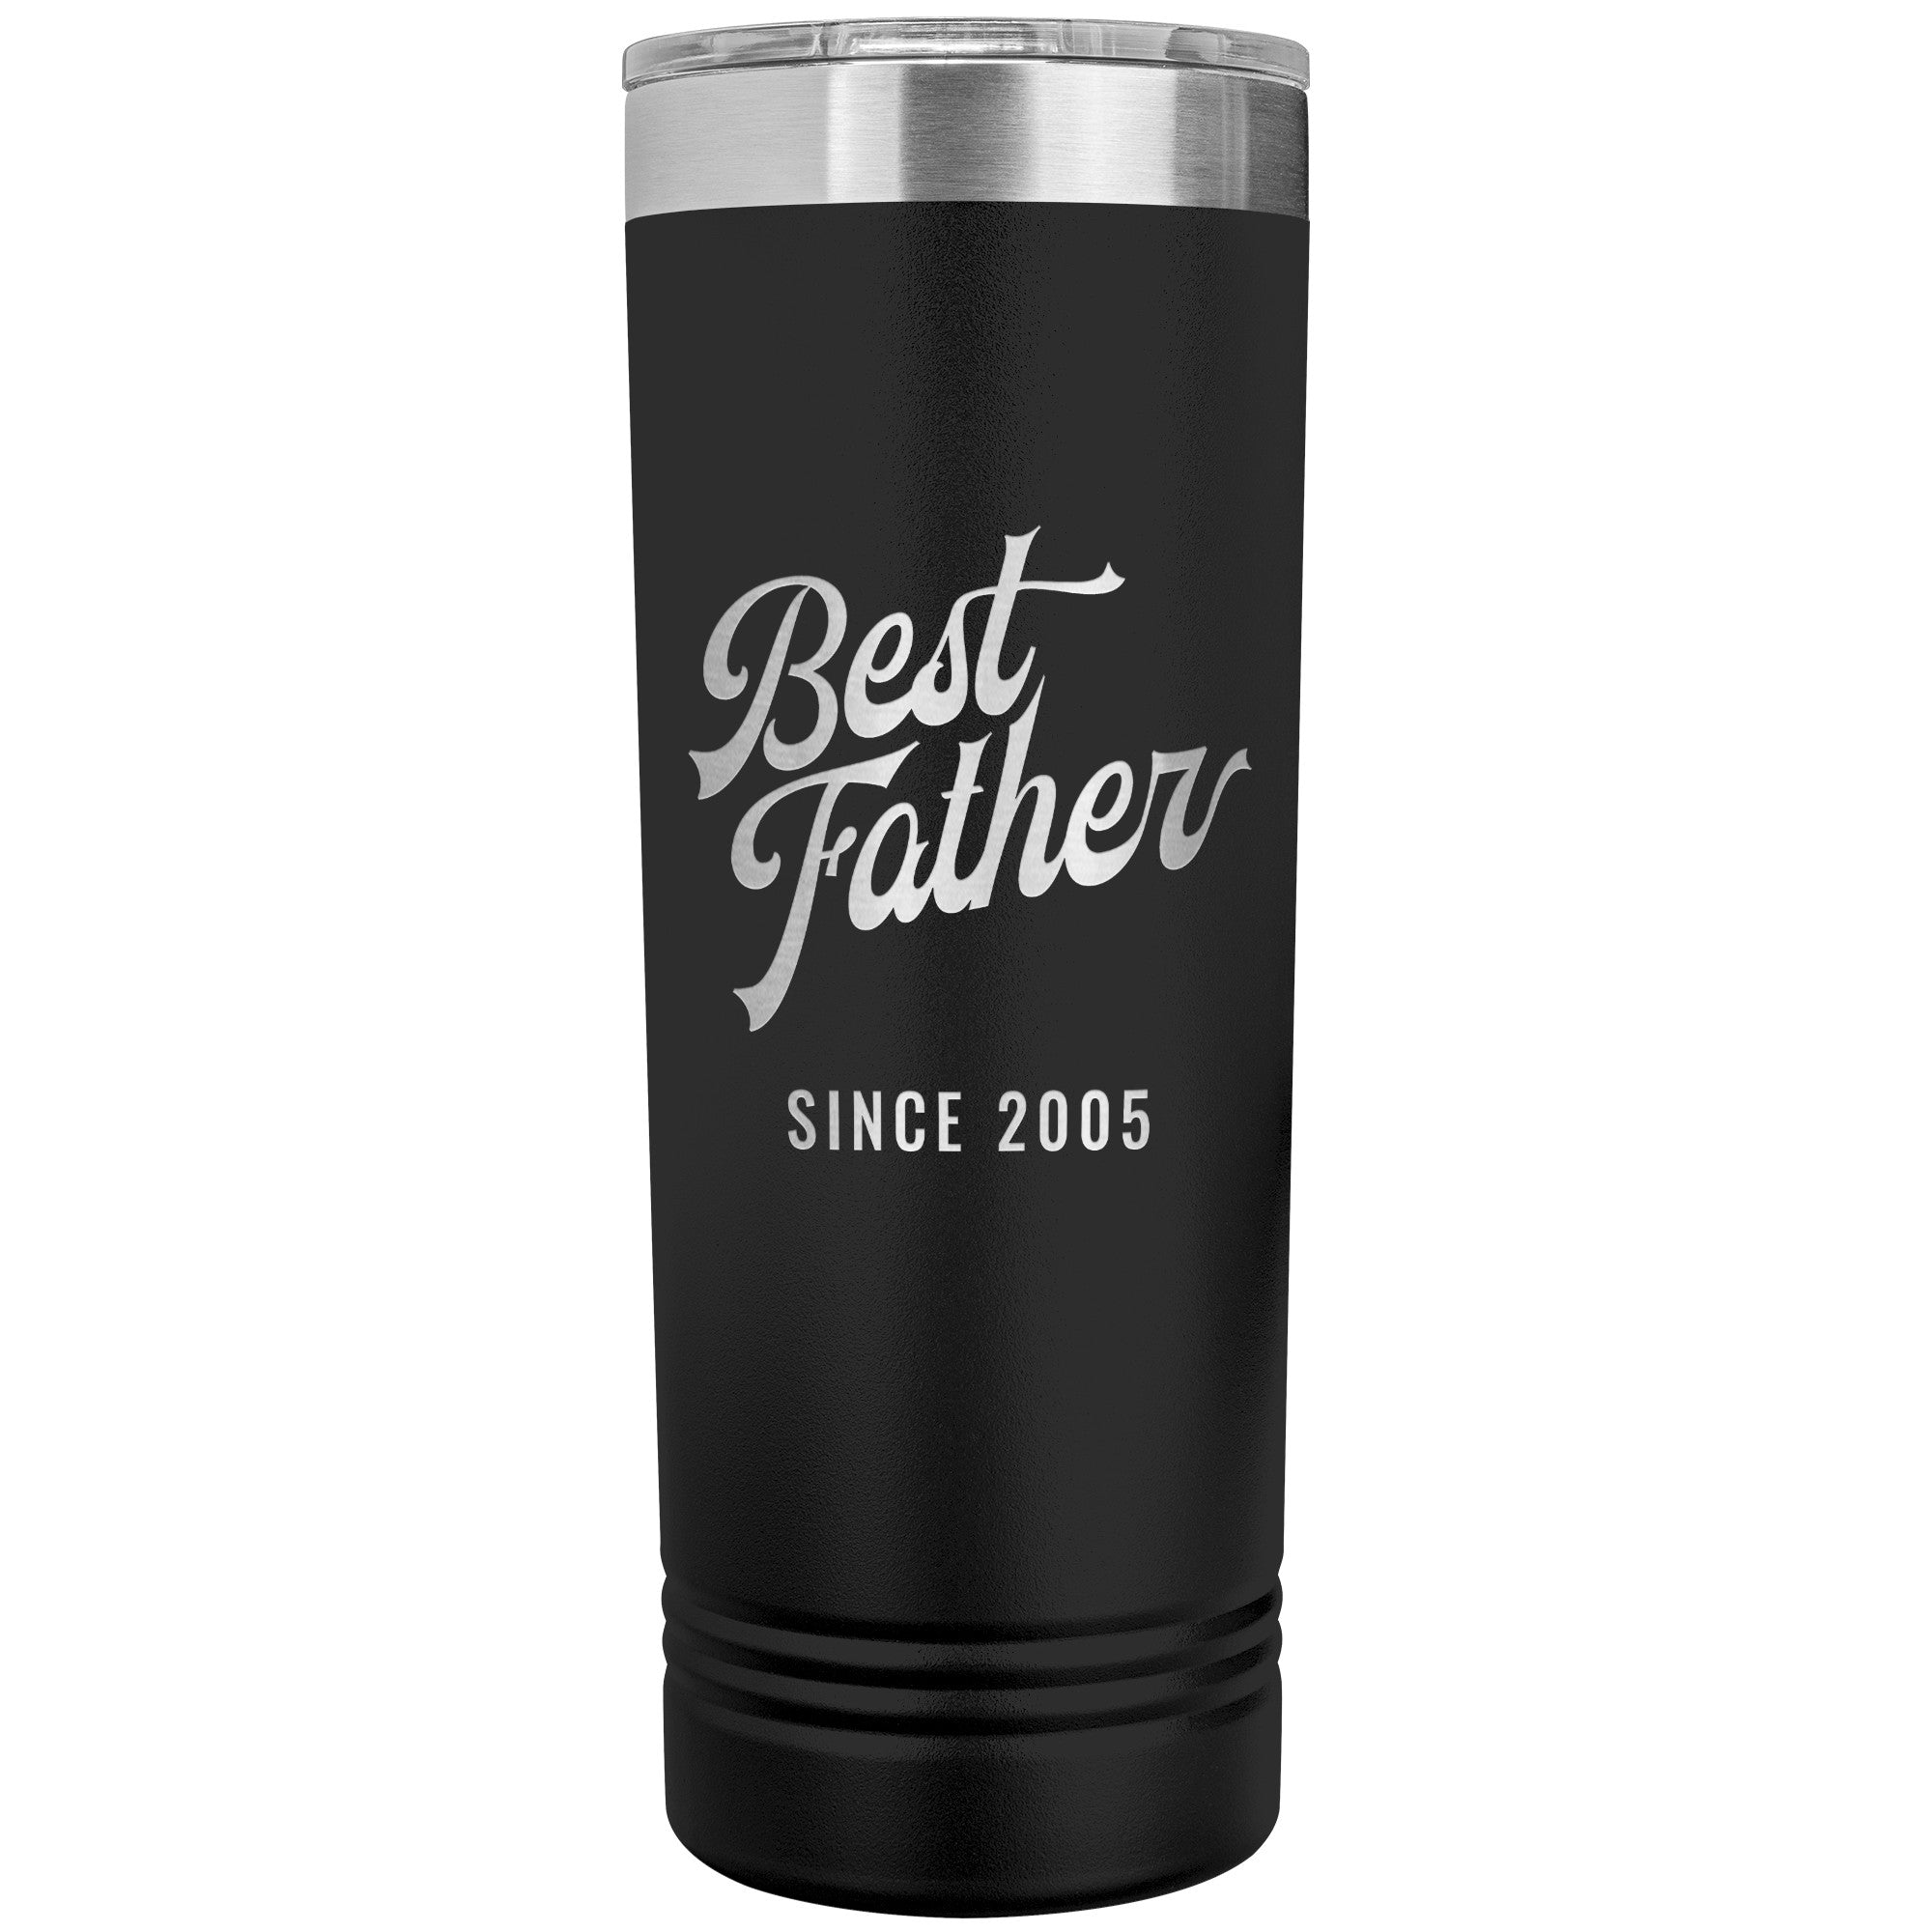 Best Father Since 2005 - 22oz Insulated Skinny Tumbler